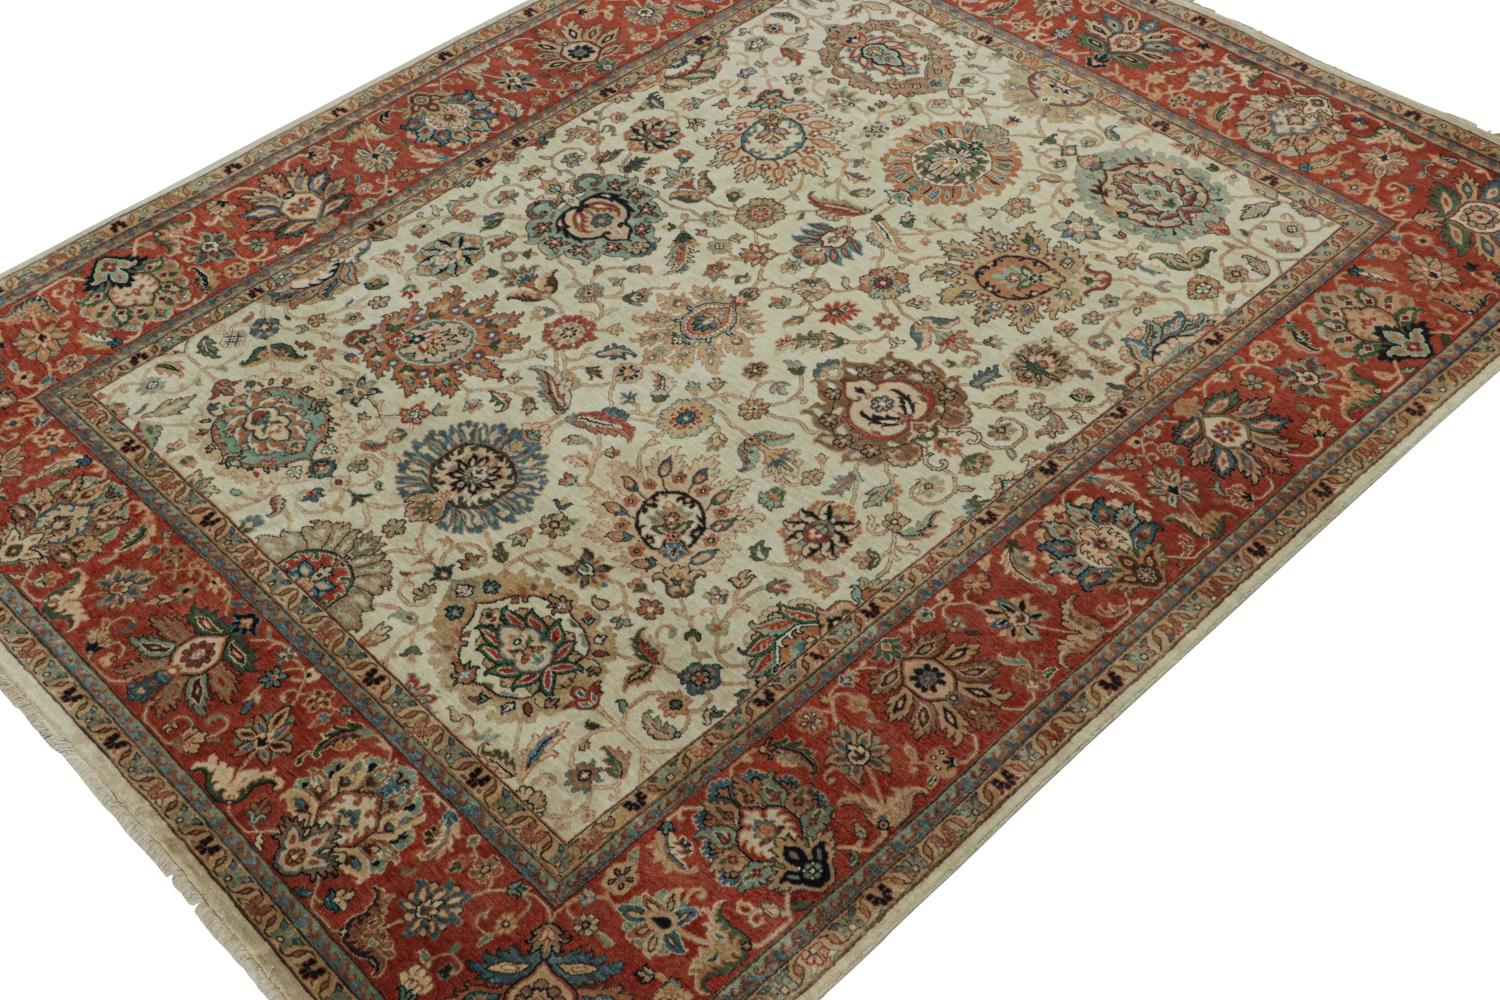 Hand-Knotted Rug & Kilim’s Persian Style Rug in Beige and Red with Floral Patterns For Sale